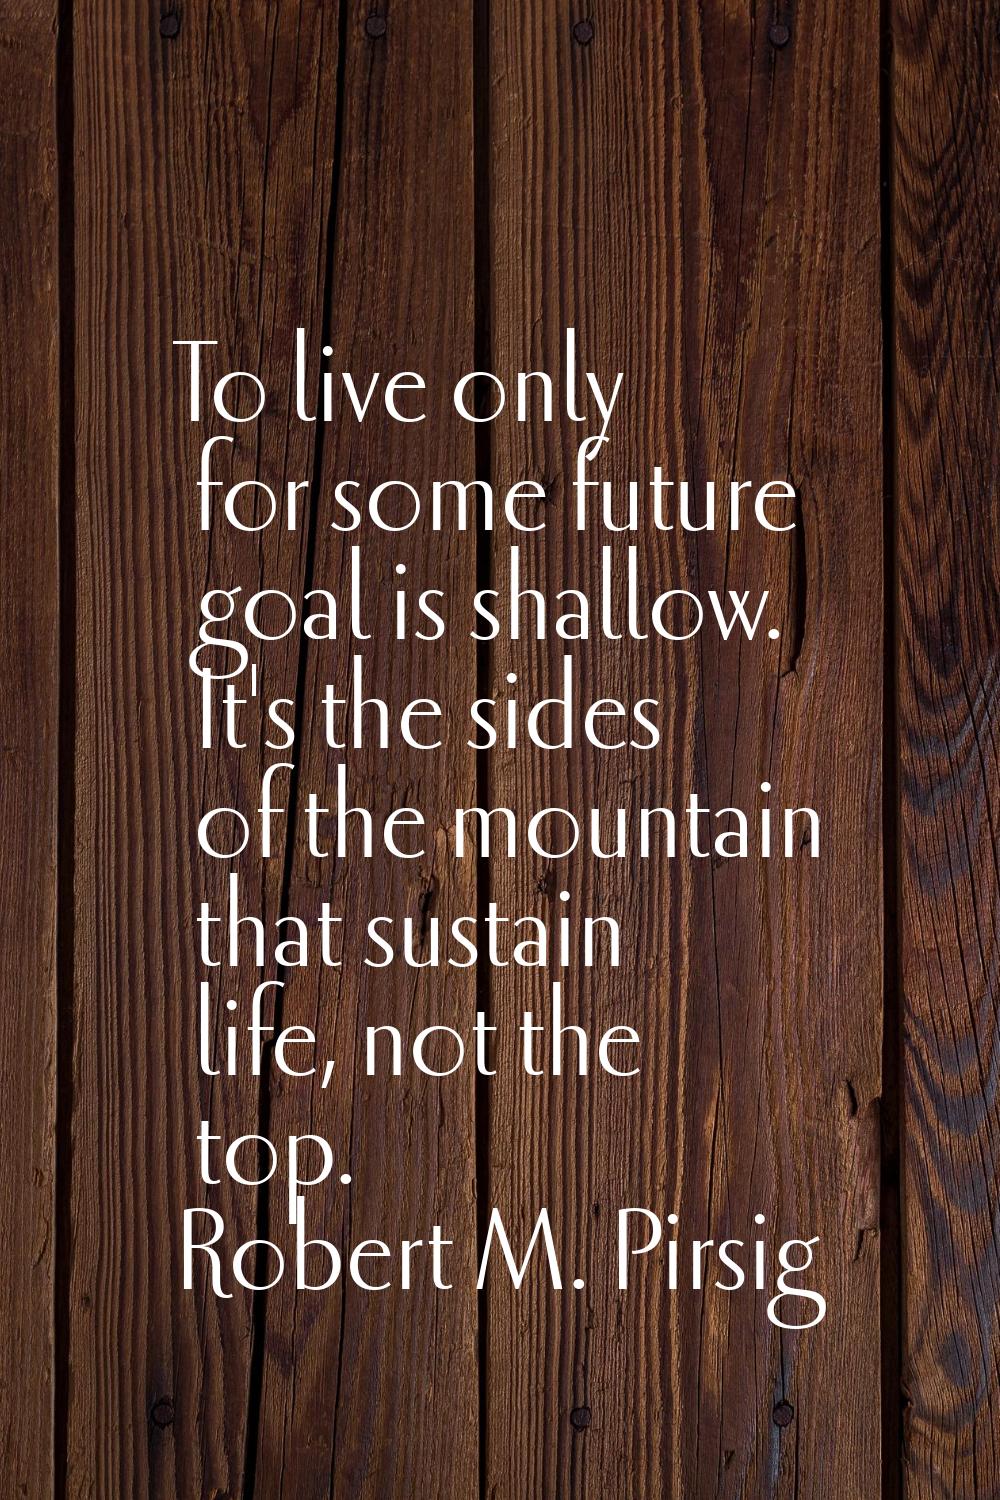 To live only for some future goal is shallow. It's the sides of the mountain that sustain life, not